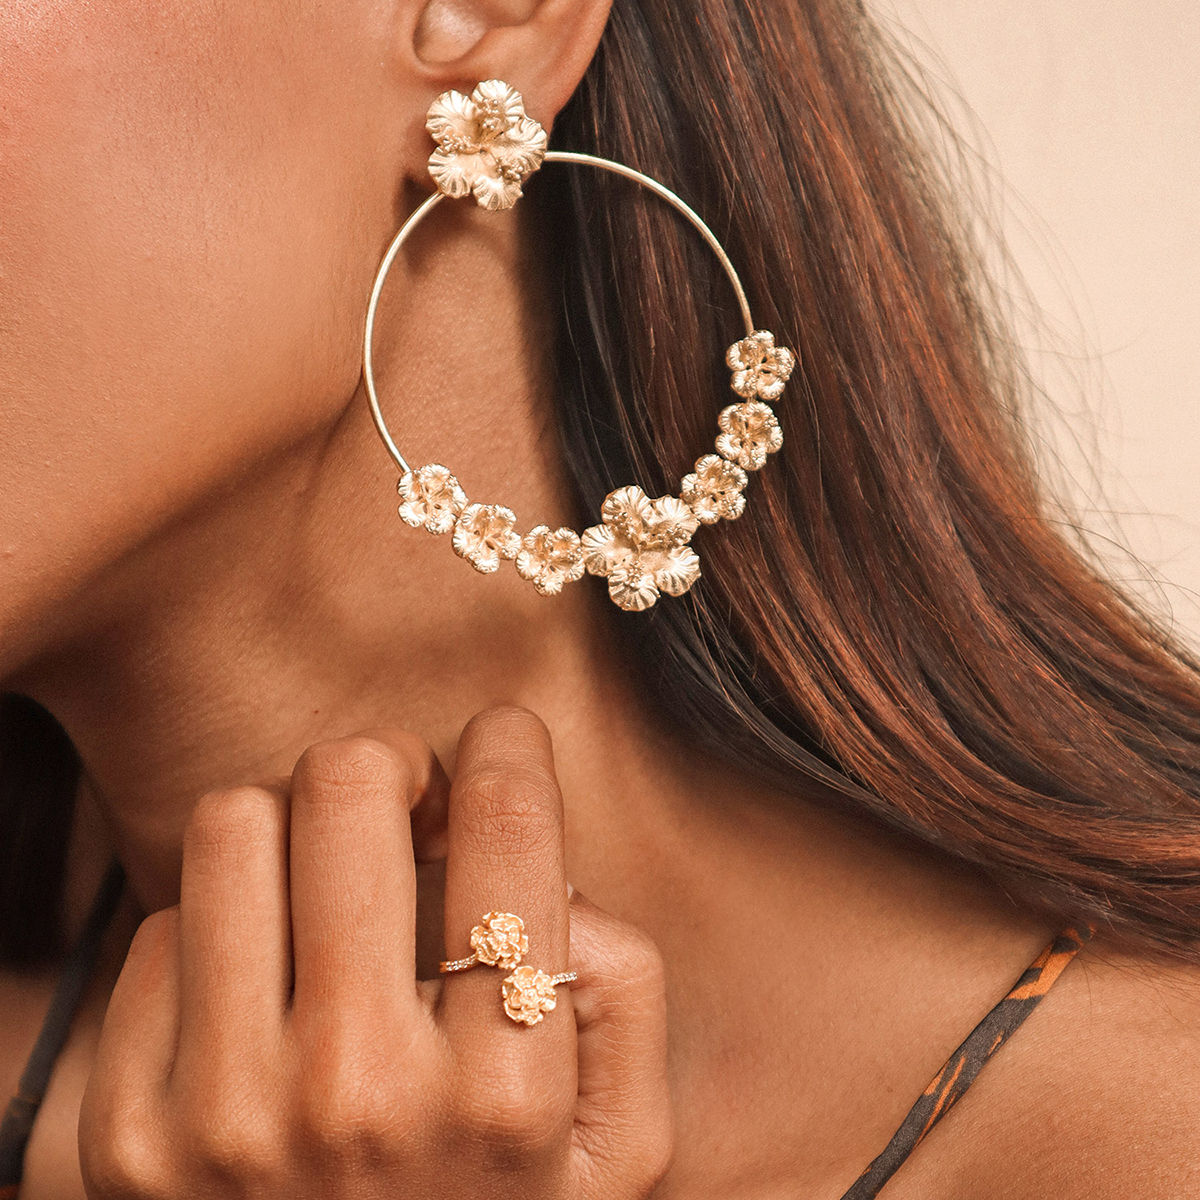 Chic Statement Floral Open Ring and Hoop Earrings Set